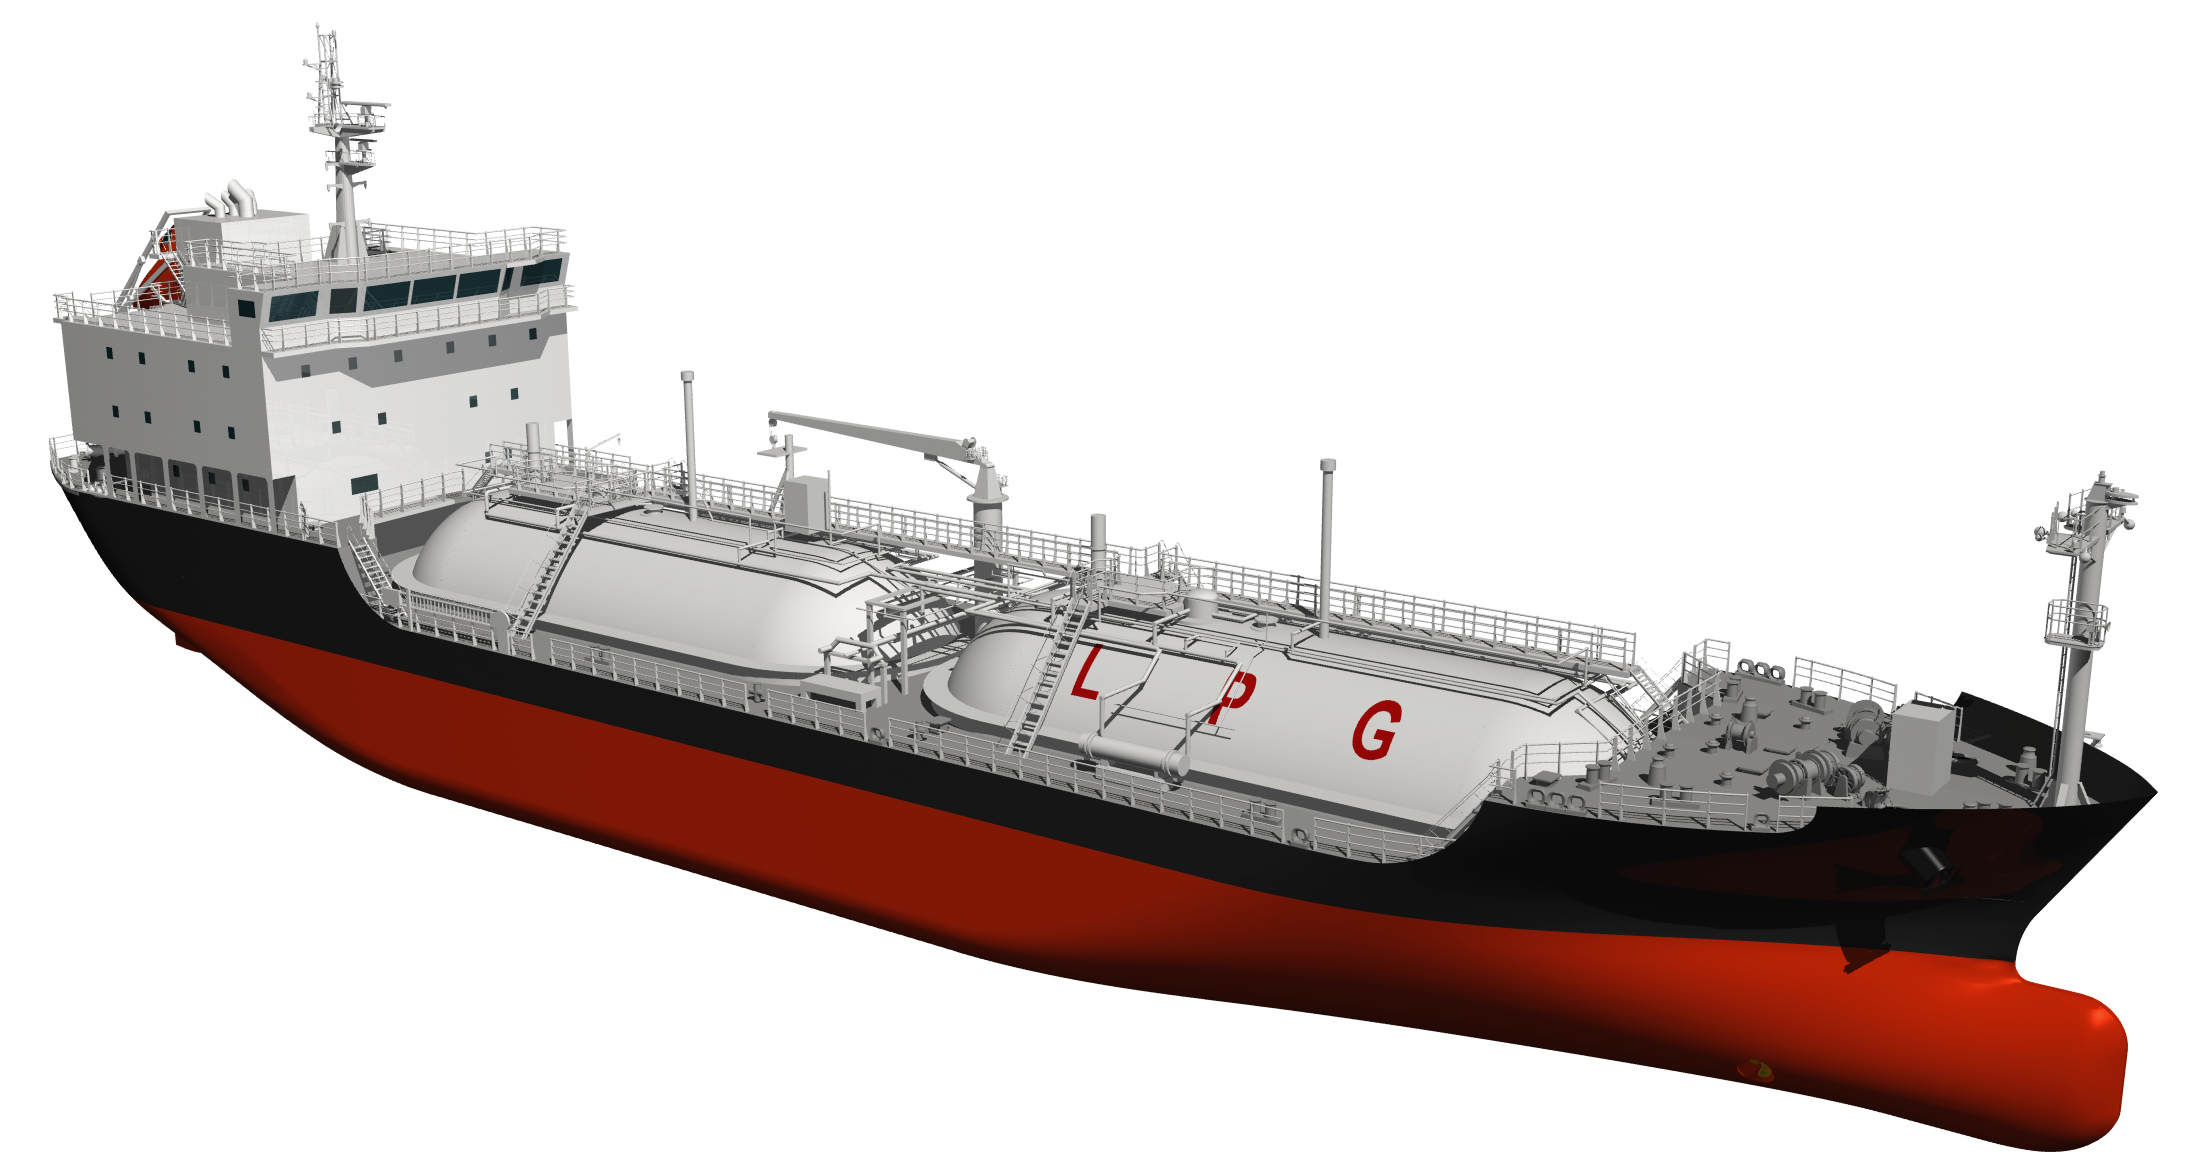 TSUNEISHI SHIPBUILDING receives order for first LPG carrier (exterior image)